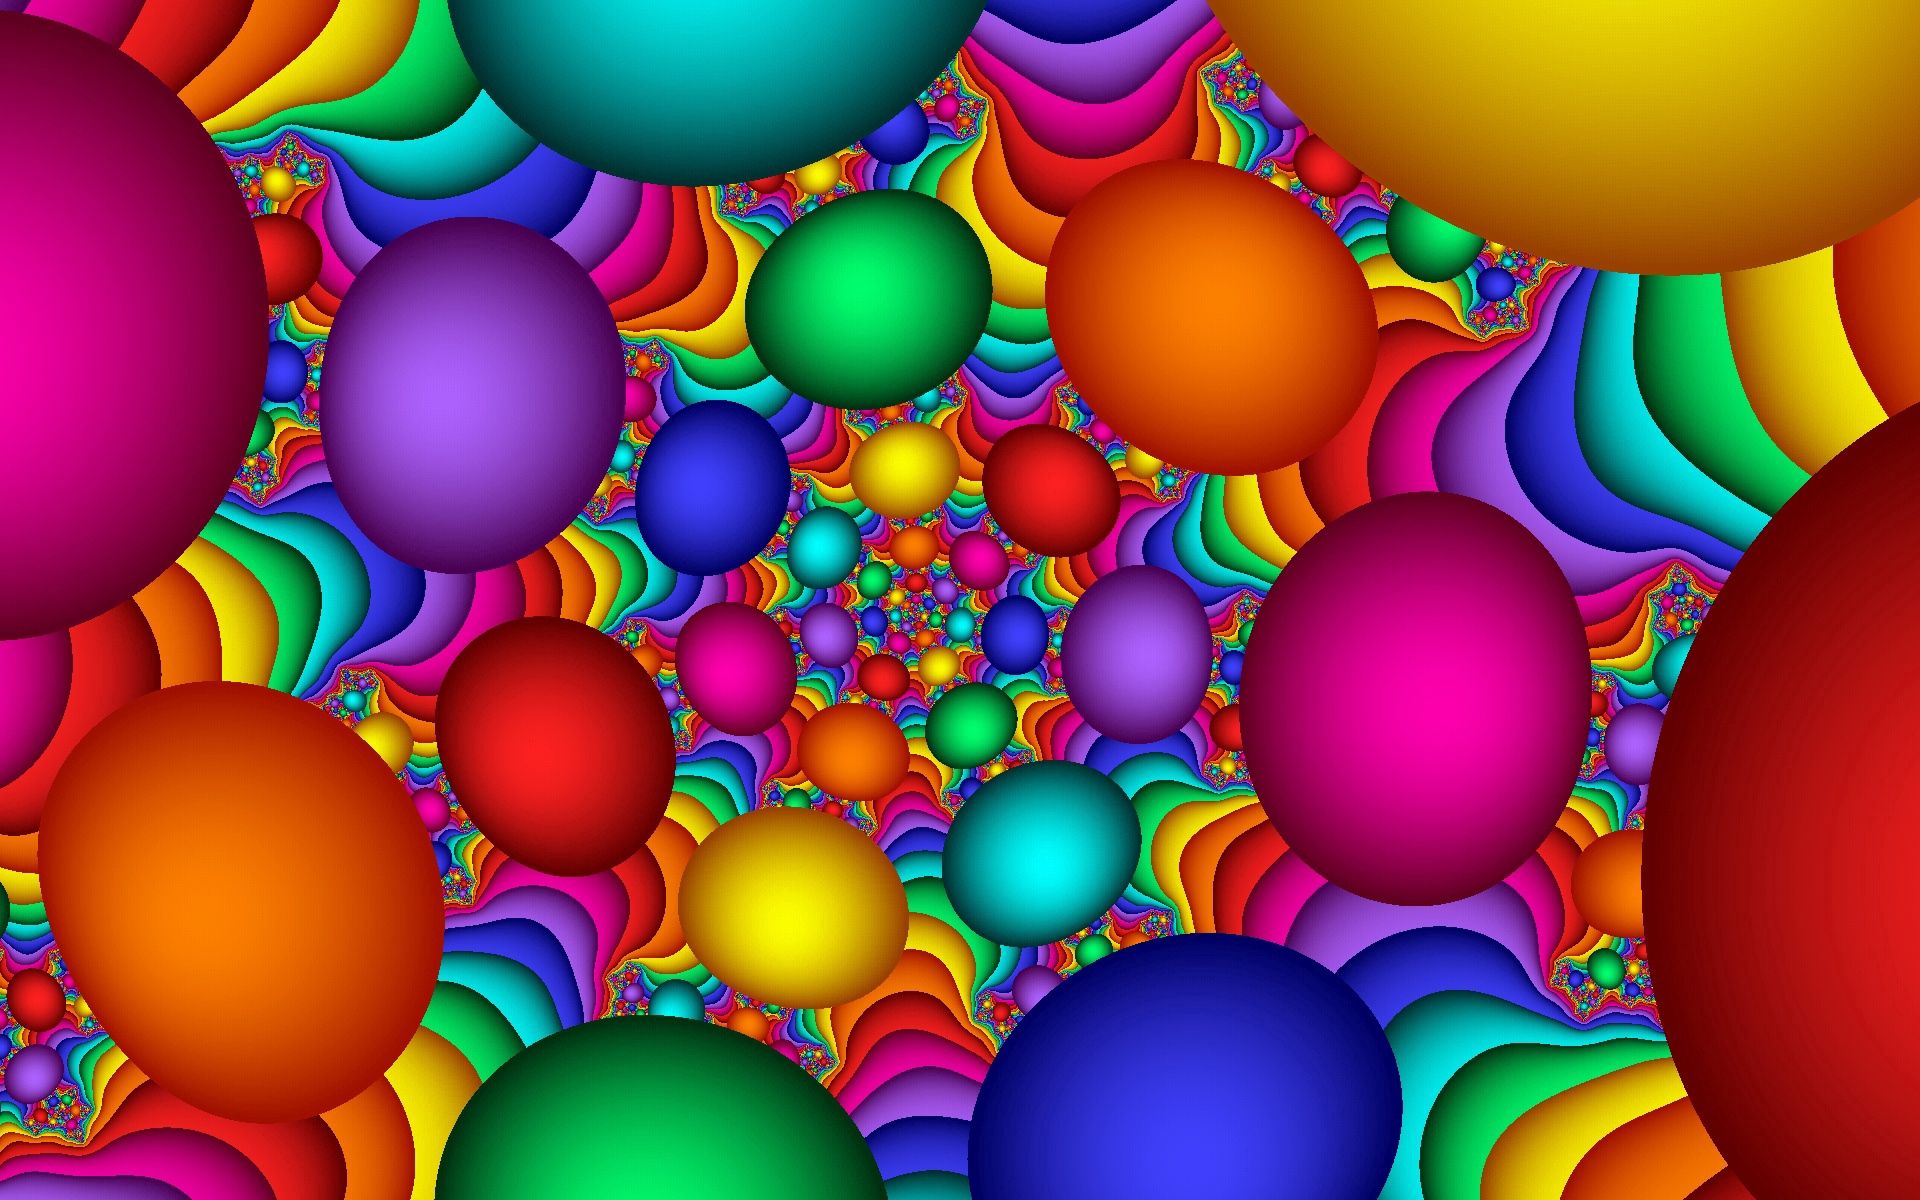 motley, multicolored, balls, abstract, background, bright